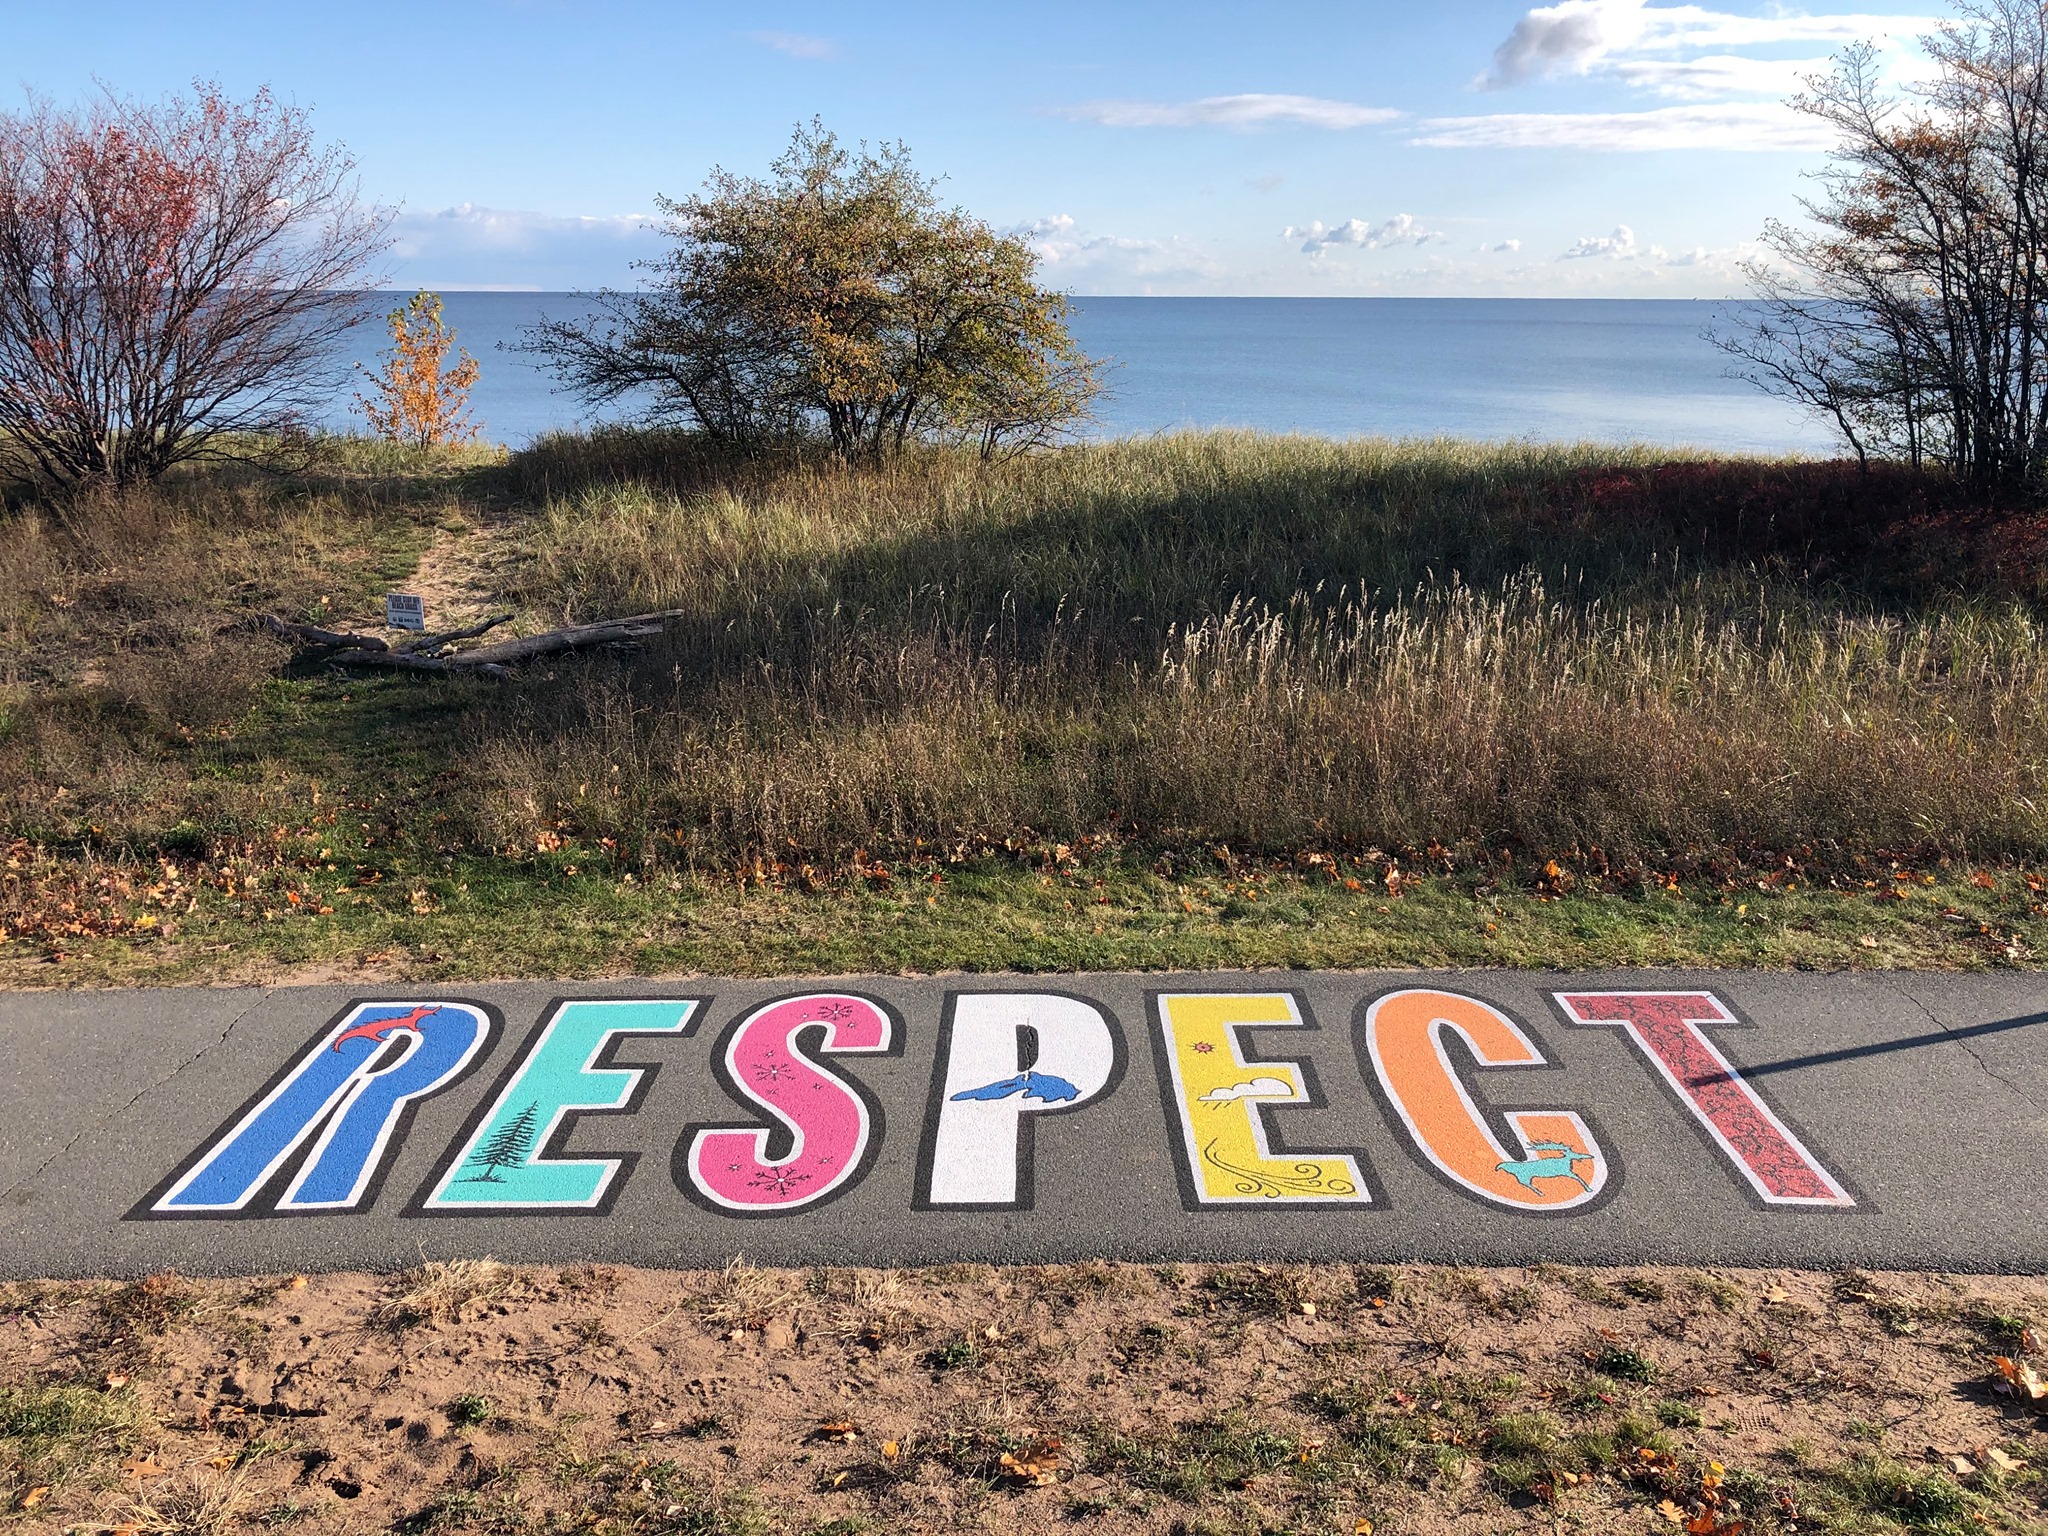 Respect mural on bikepath in front of the lakeshore